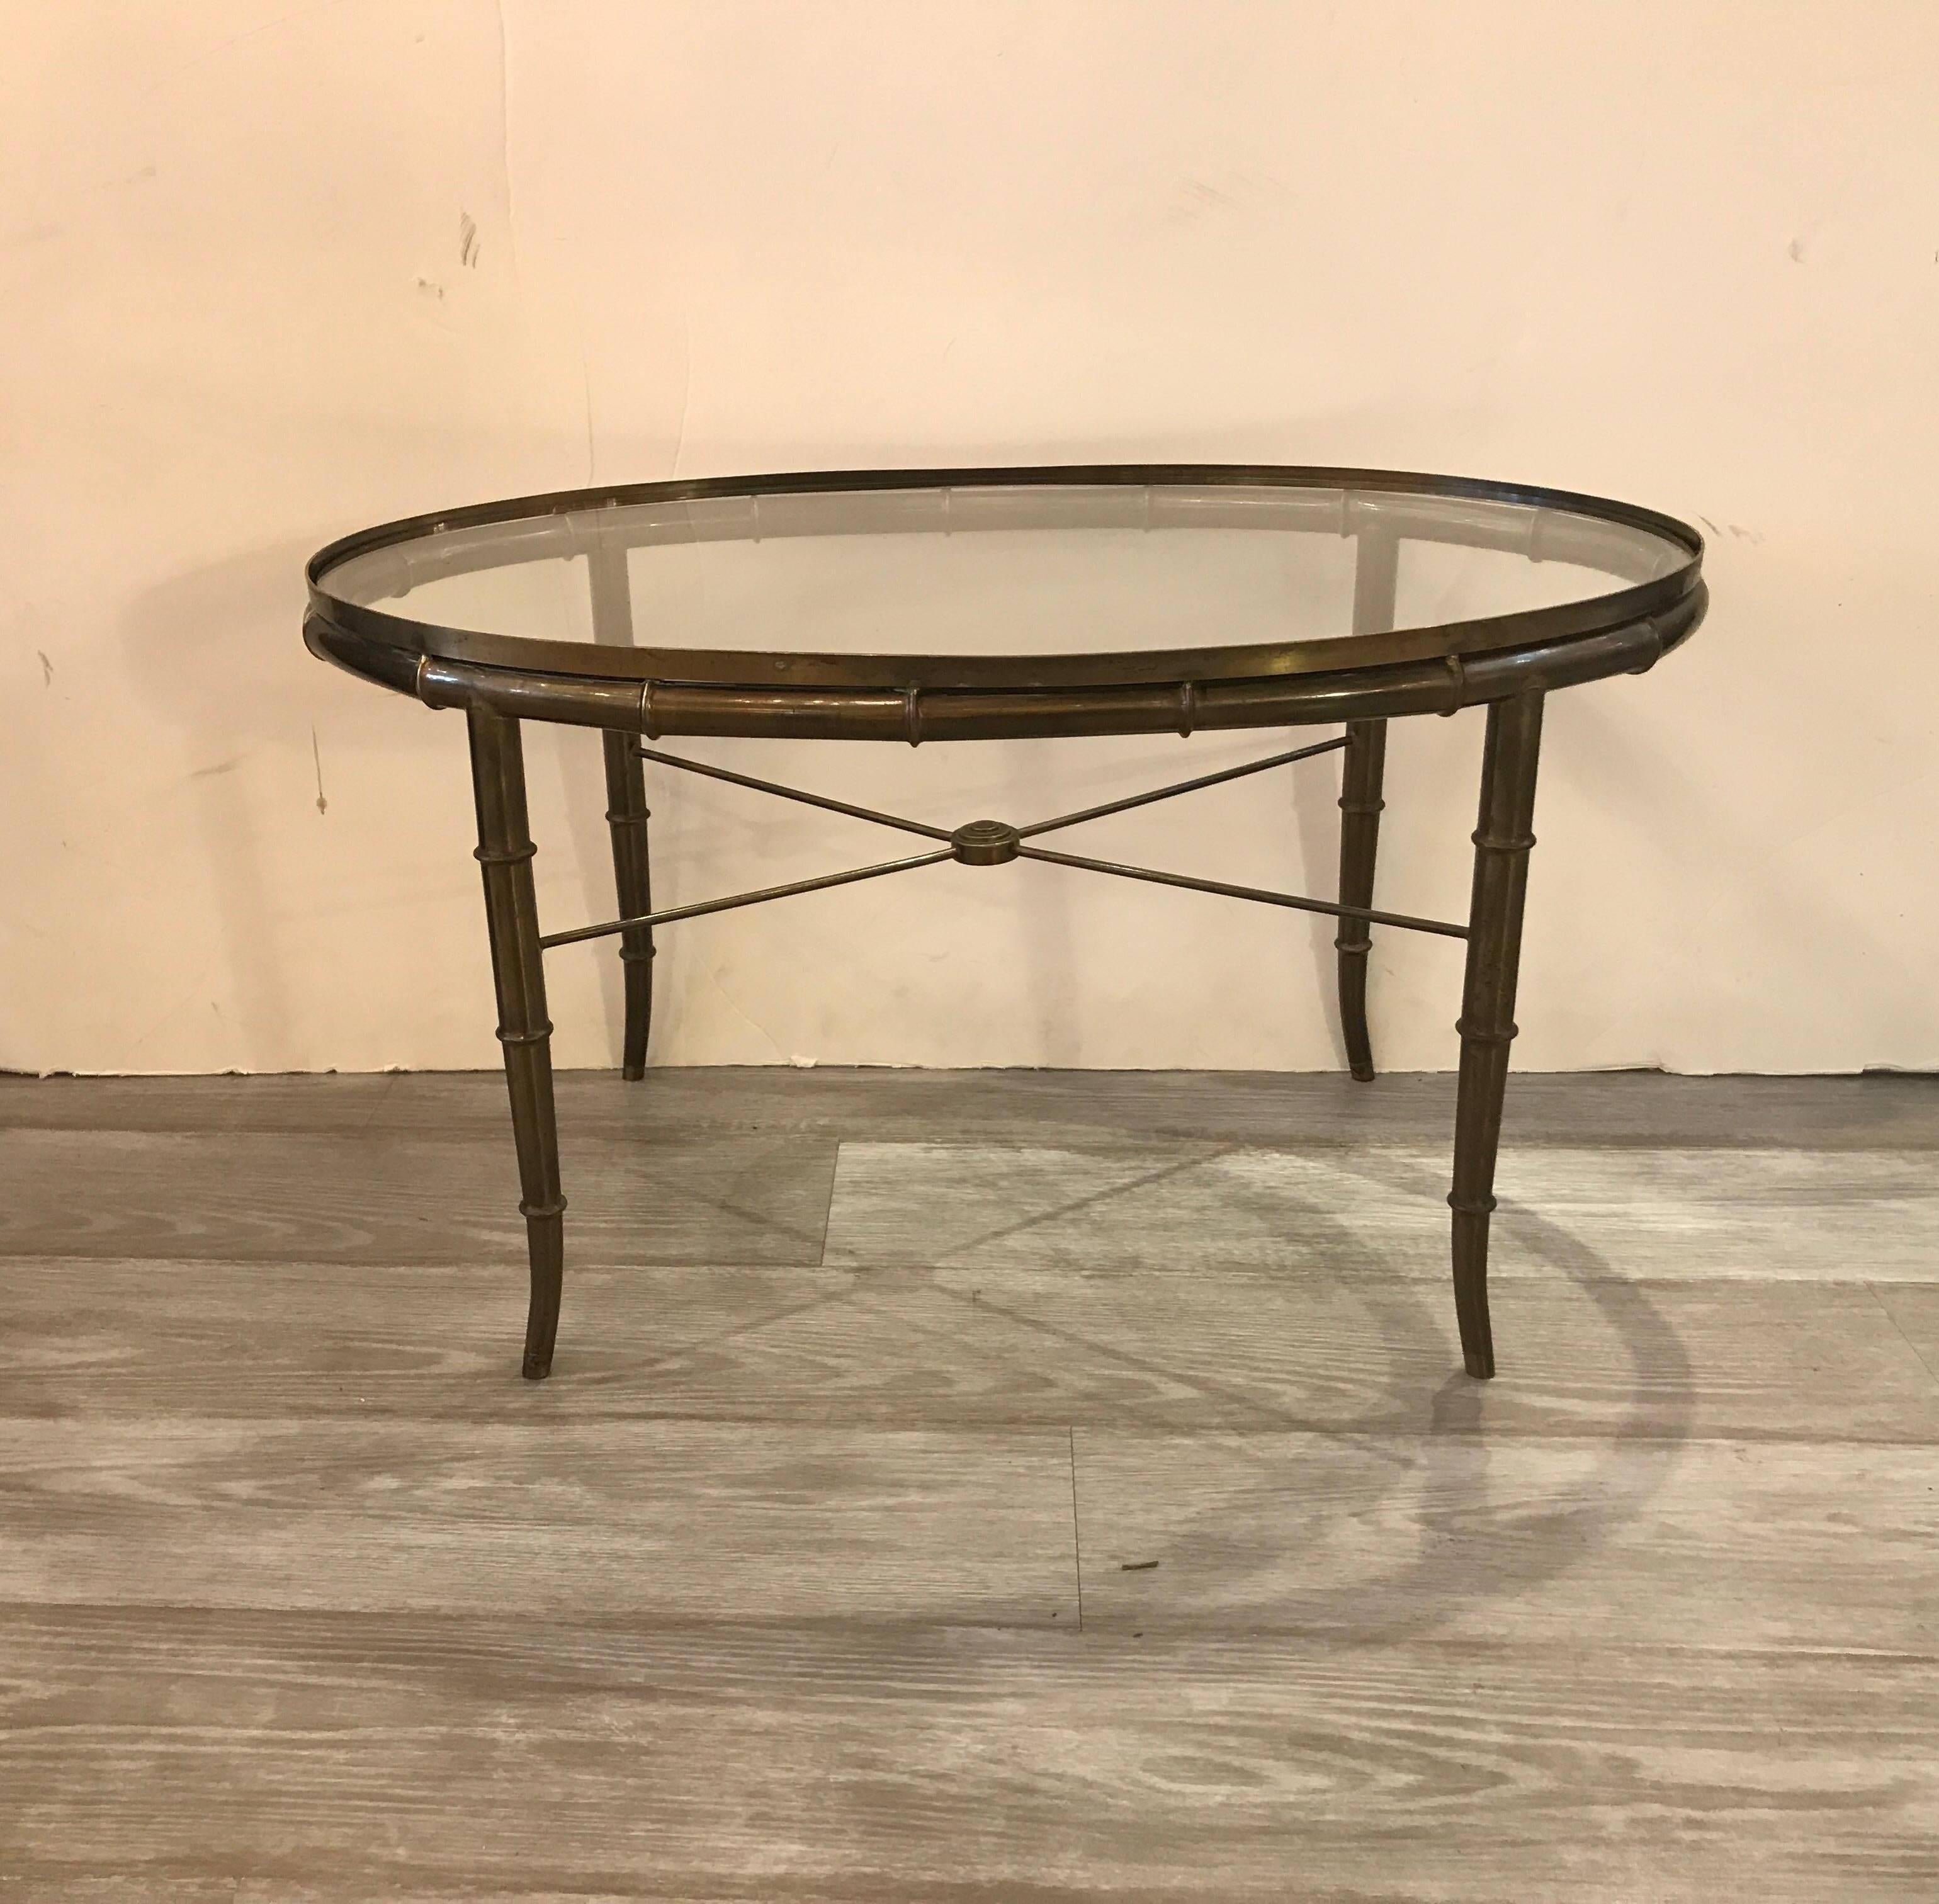 A diminutive pair of Mastercraft patinated brass and glass oval coffee tables. The gently splayed bamboo motif legs with X-stretcher bases. Priced for that pair but if you are interested in one.